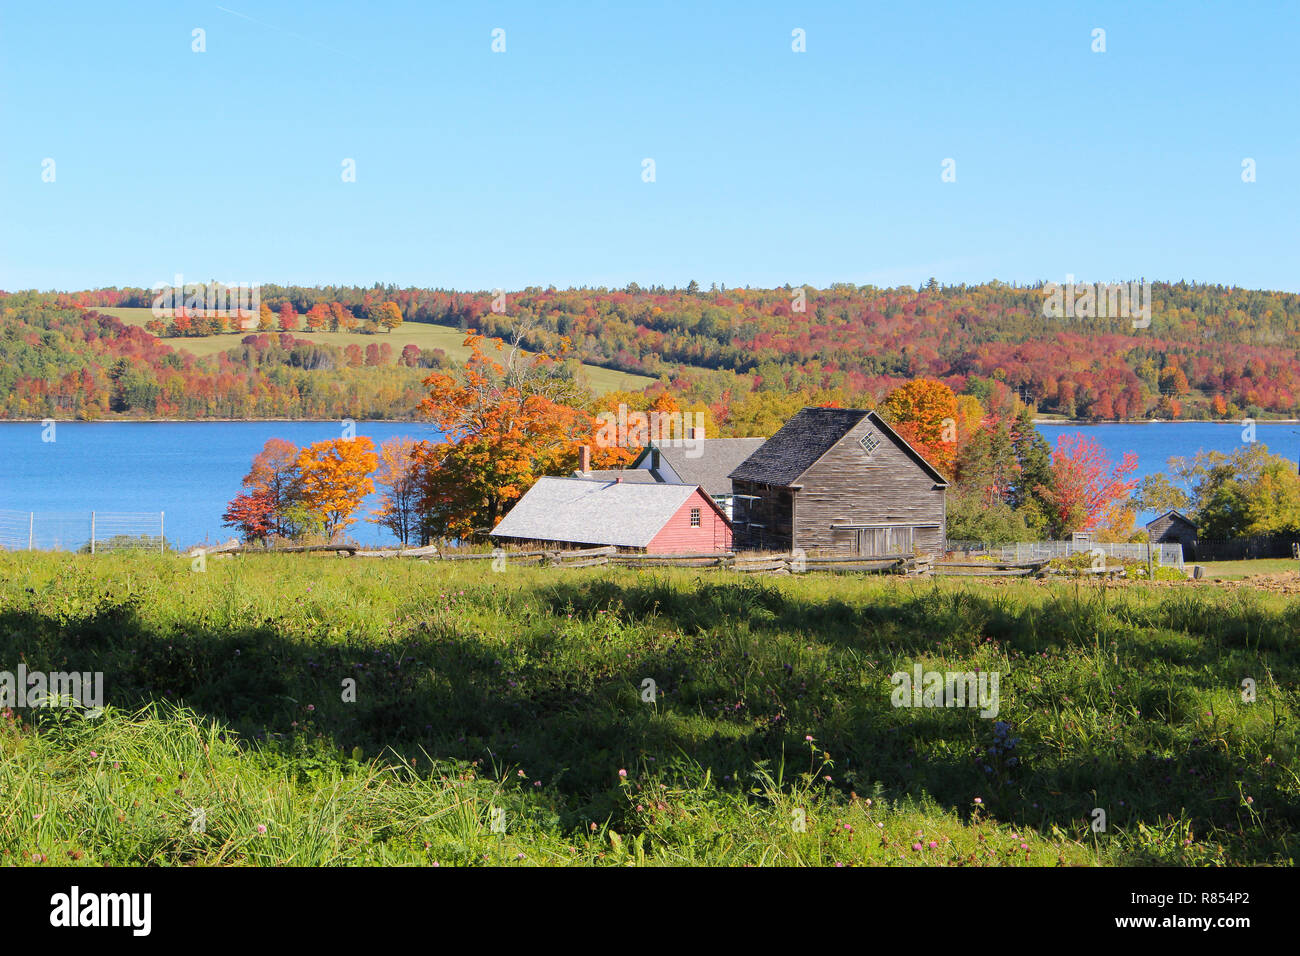 Quaint country houses  surrounded by colorful autumn leaves with dirt road and blue sky in Kings Landing, New Brunswick, Canada Stock Photo